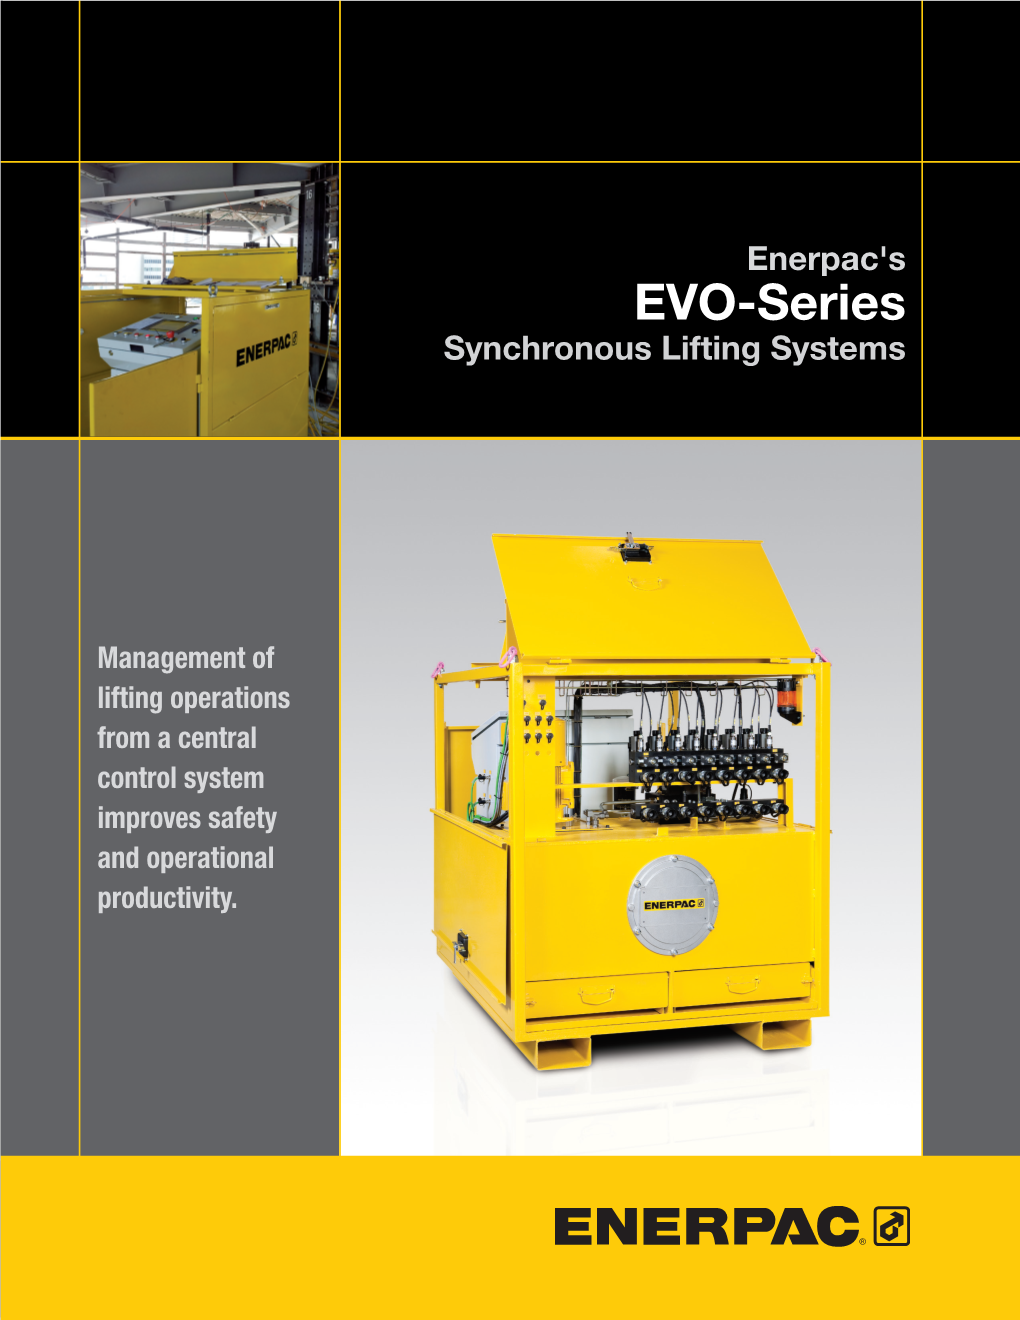 EVO-Series Synchronous Lifting Systems